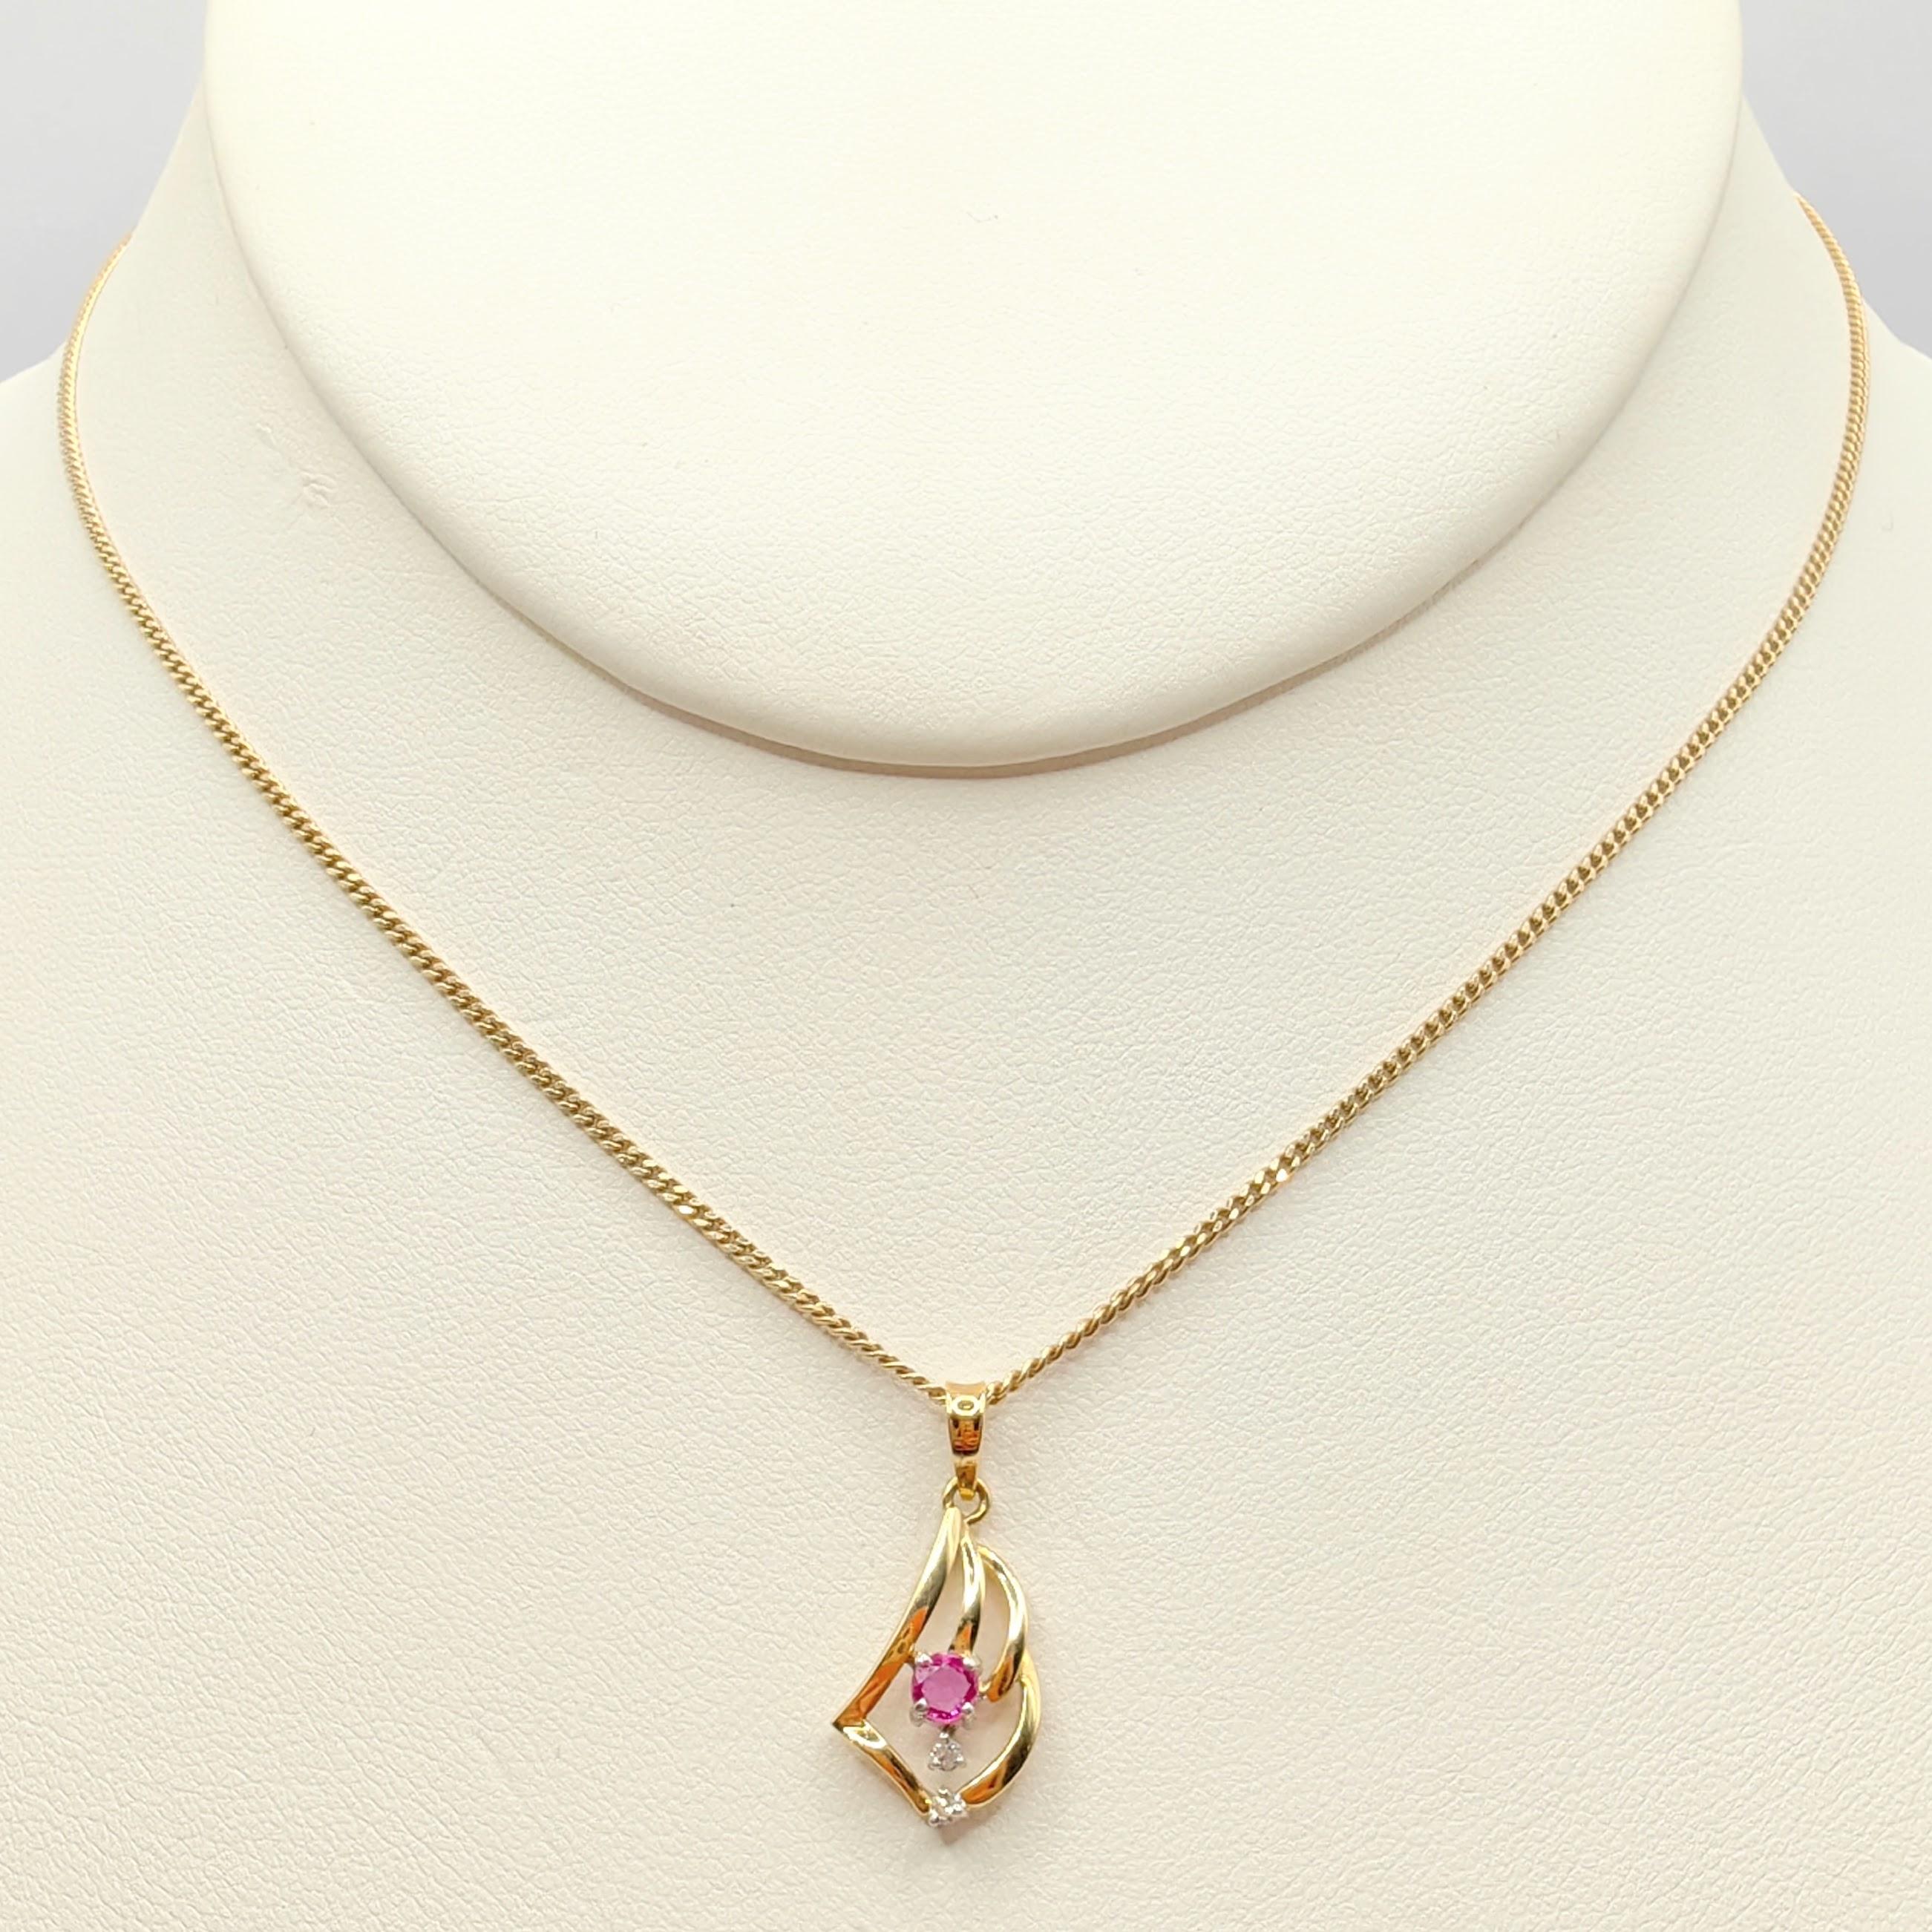 Vintage Natural Pink Sapphire Diamond Necklace Pendant in 14K Yellow Gold 1